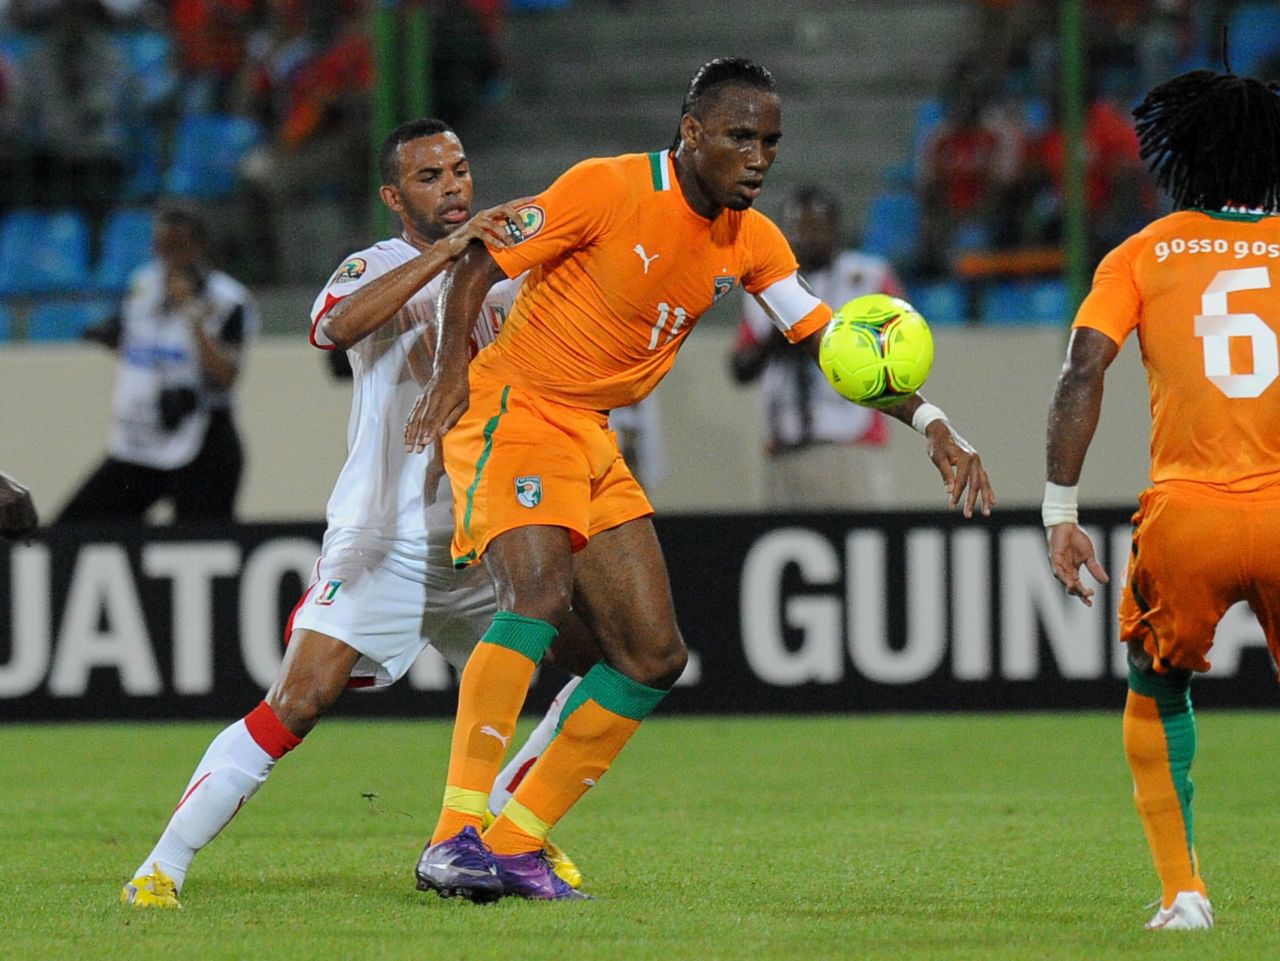 Former Chelsea star who also plays for the Ivory Coast national team, Drogba is the country's all time top scorer and has twice been named African Footballer of the Year. 